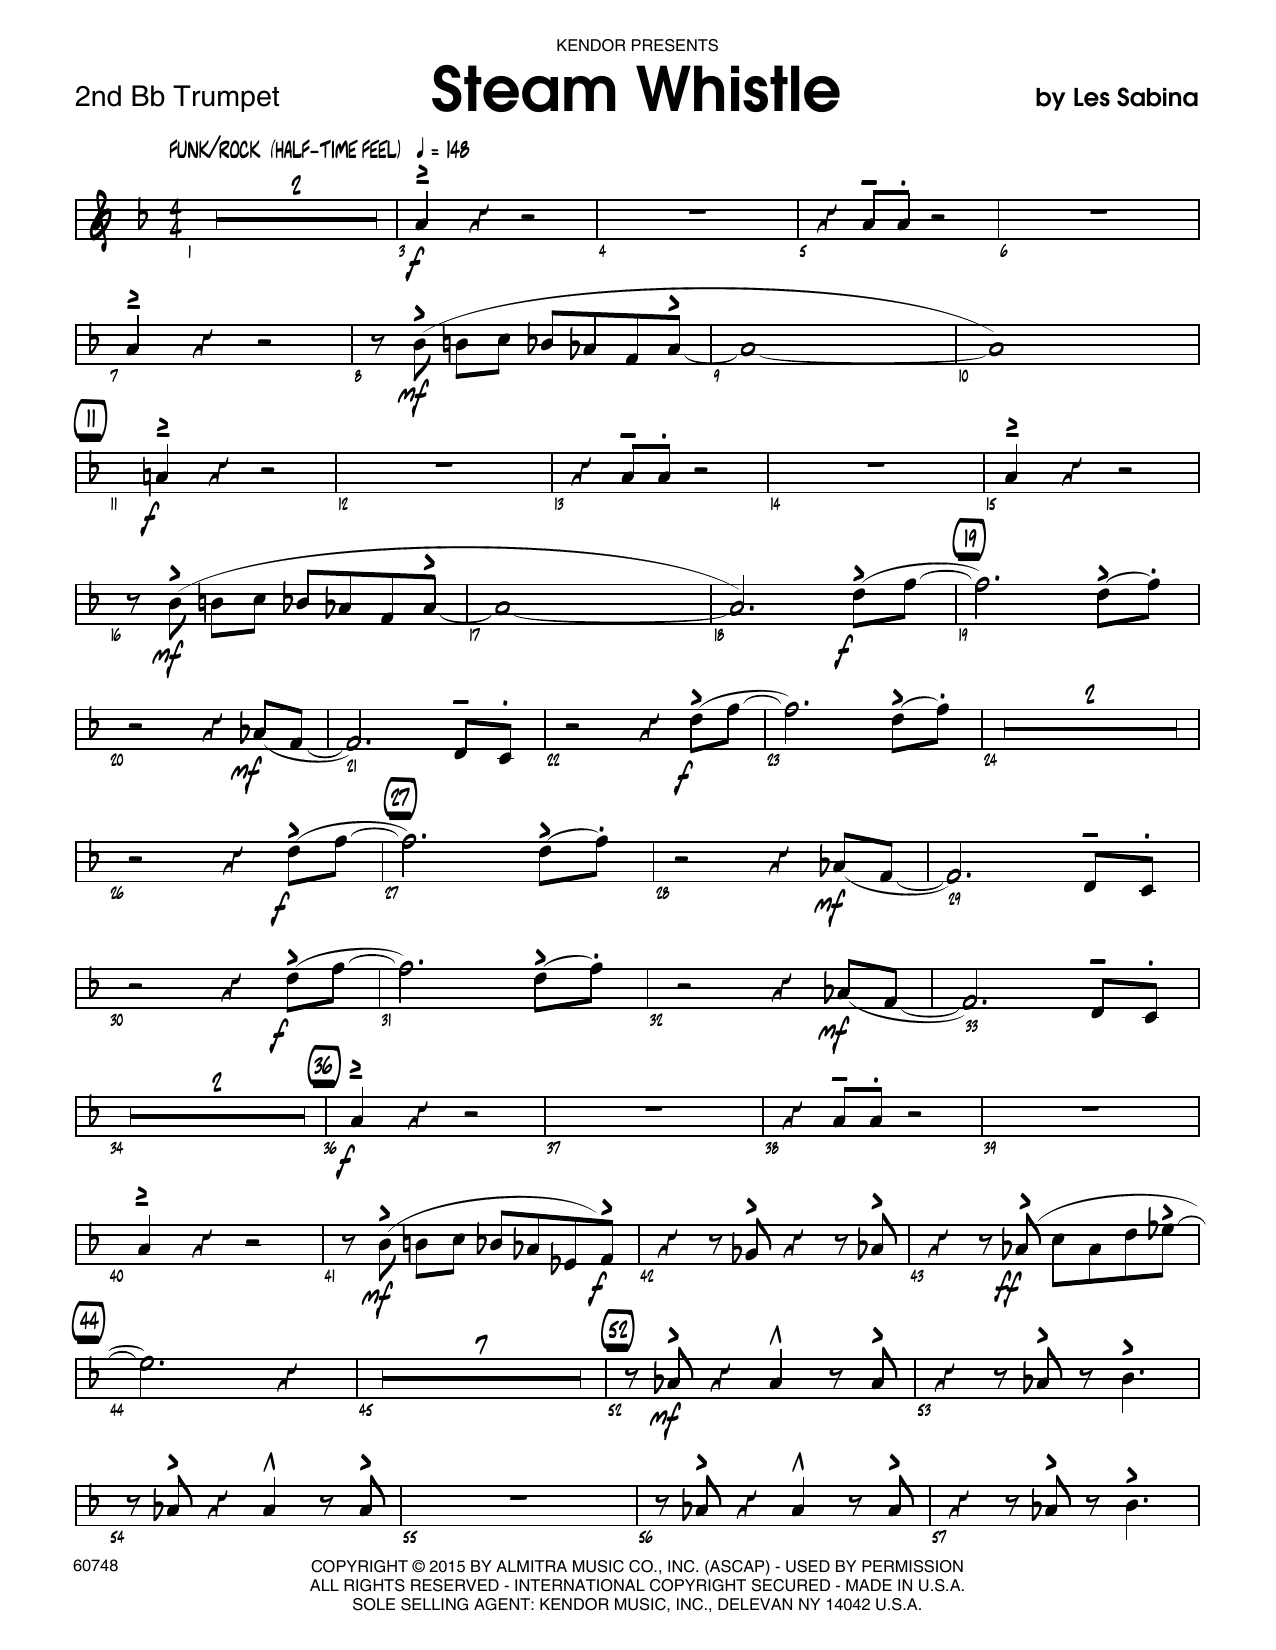 Download Les Sabina Steam Whistle - 2nd Bb Trumpet Sheet Music